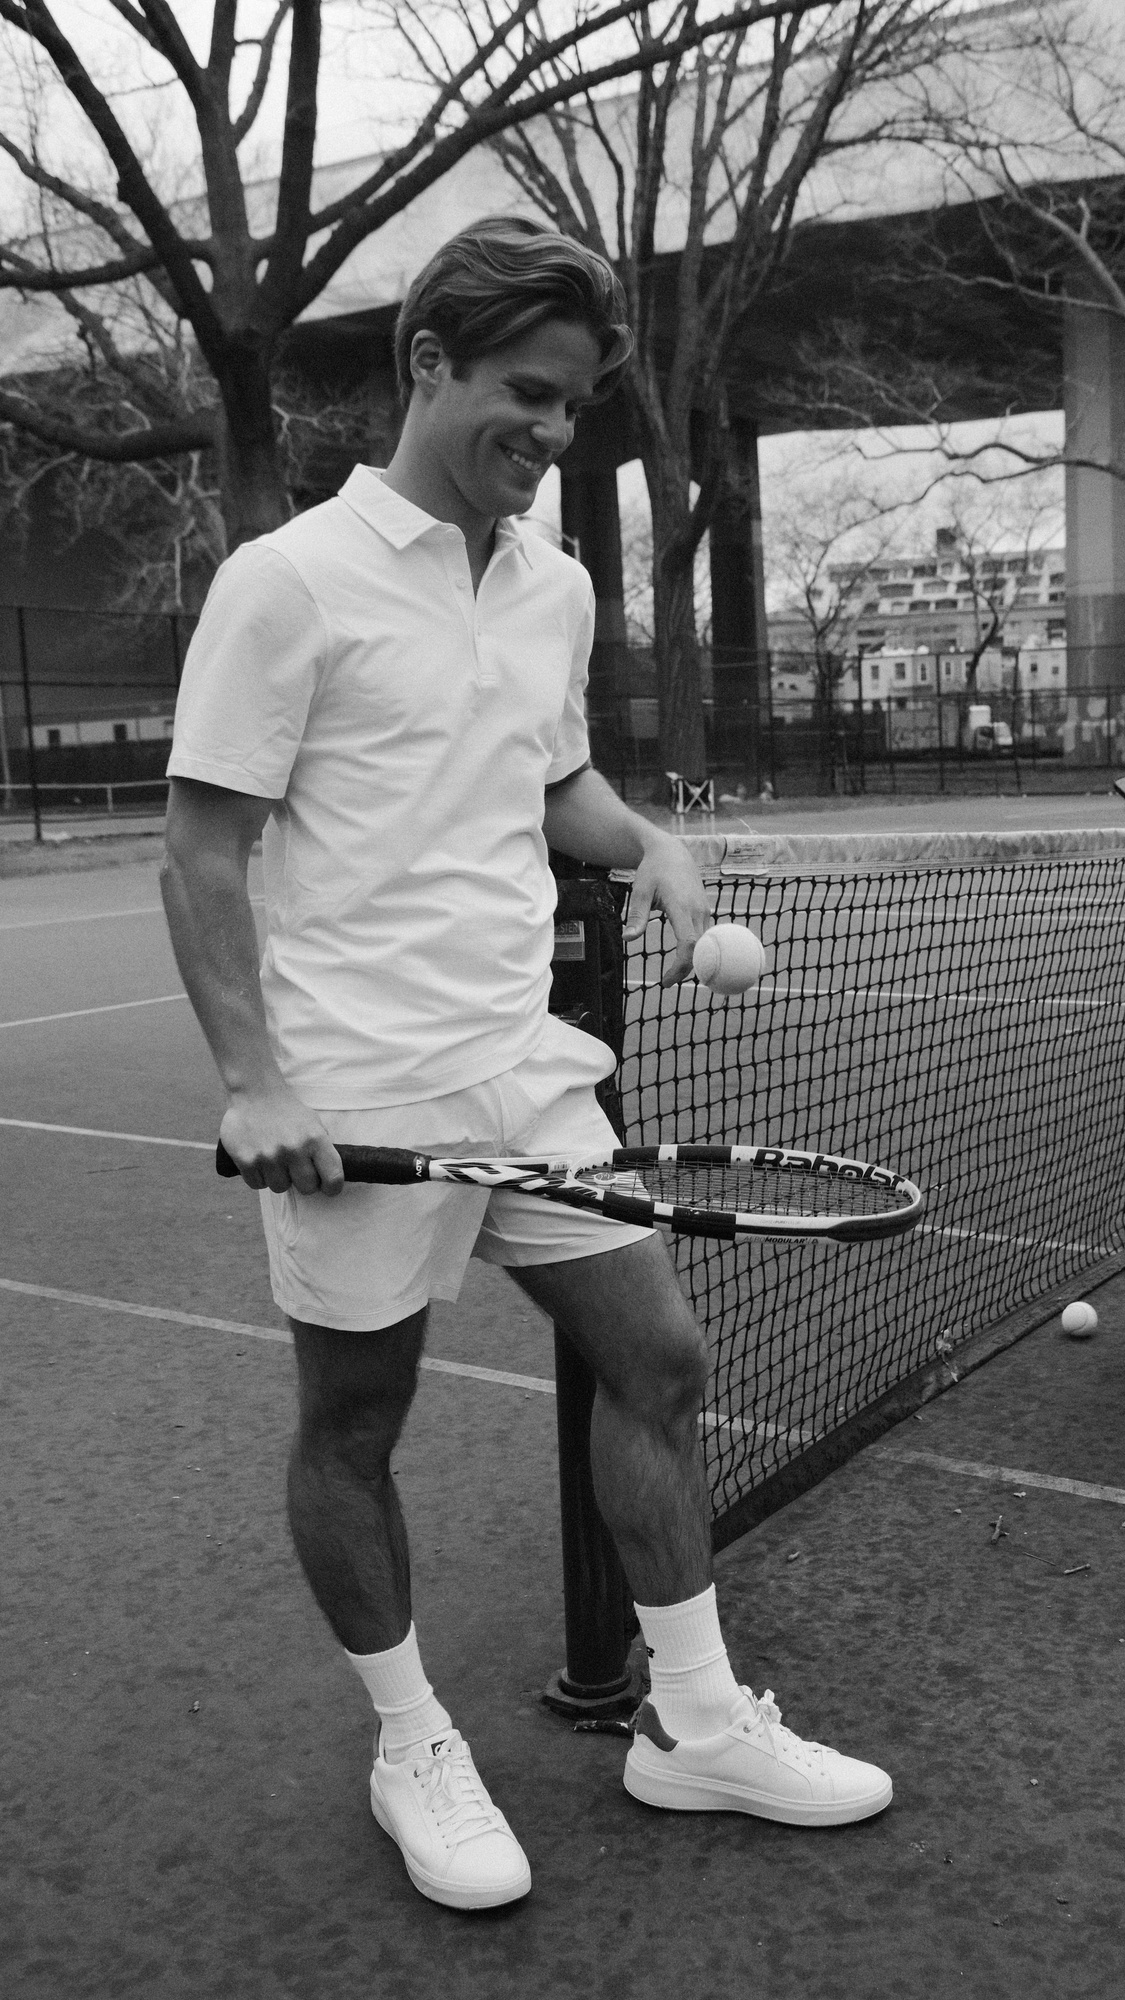 Leon M. teaches tennis lessons in Jersey City, NJ